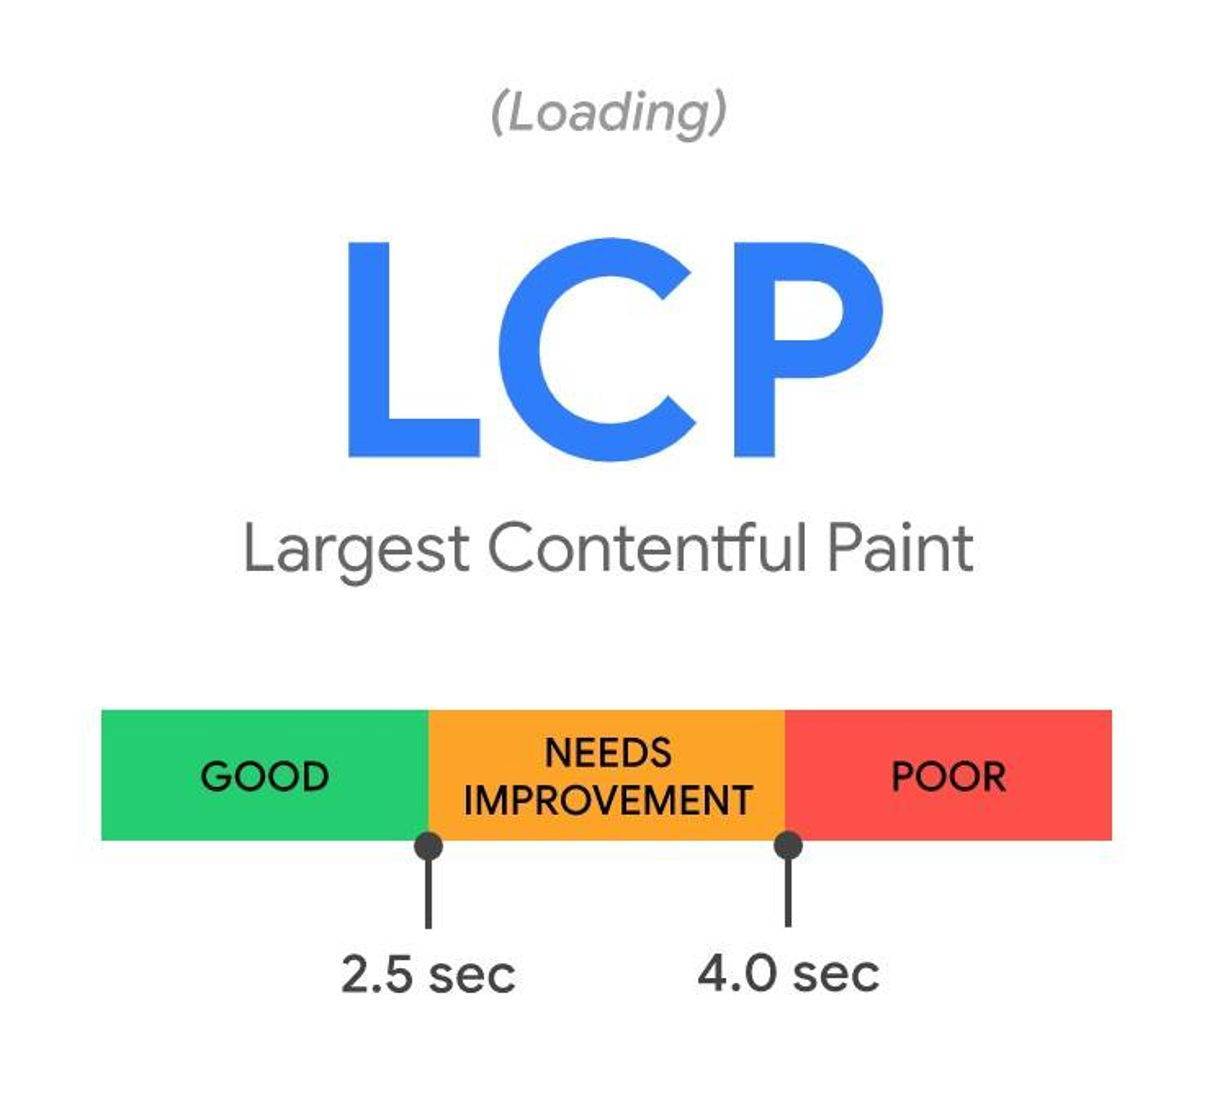 LCP Largest Contentful Paint is a Core Web Vital metric that measures page content loading performance